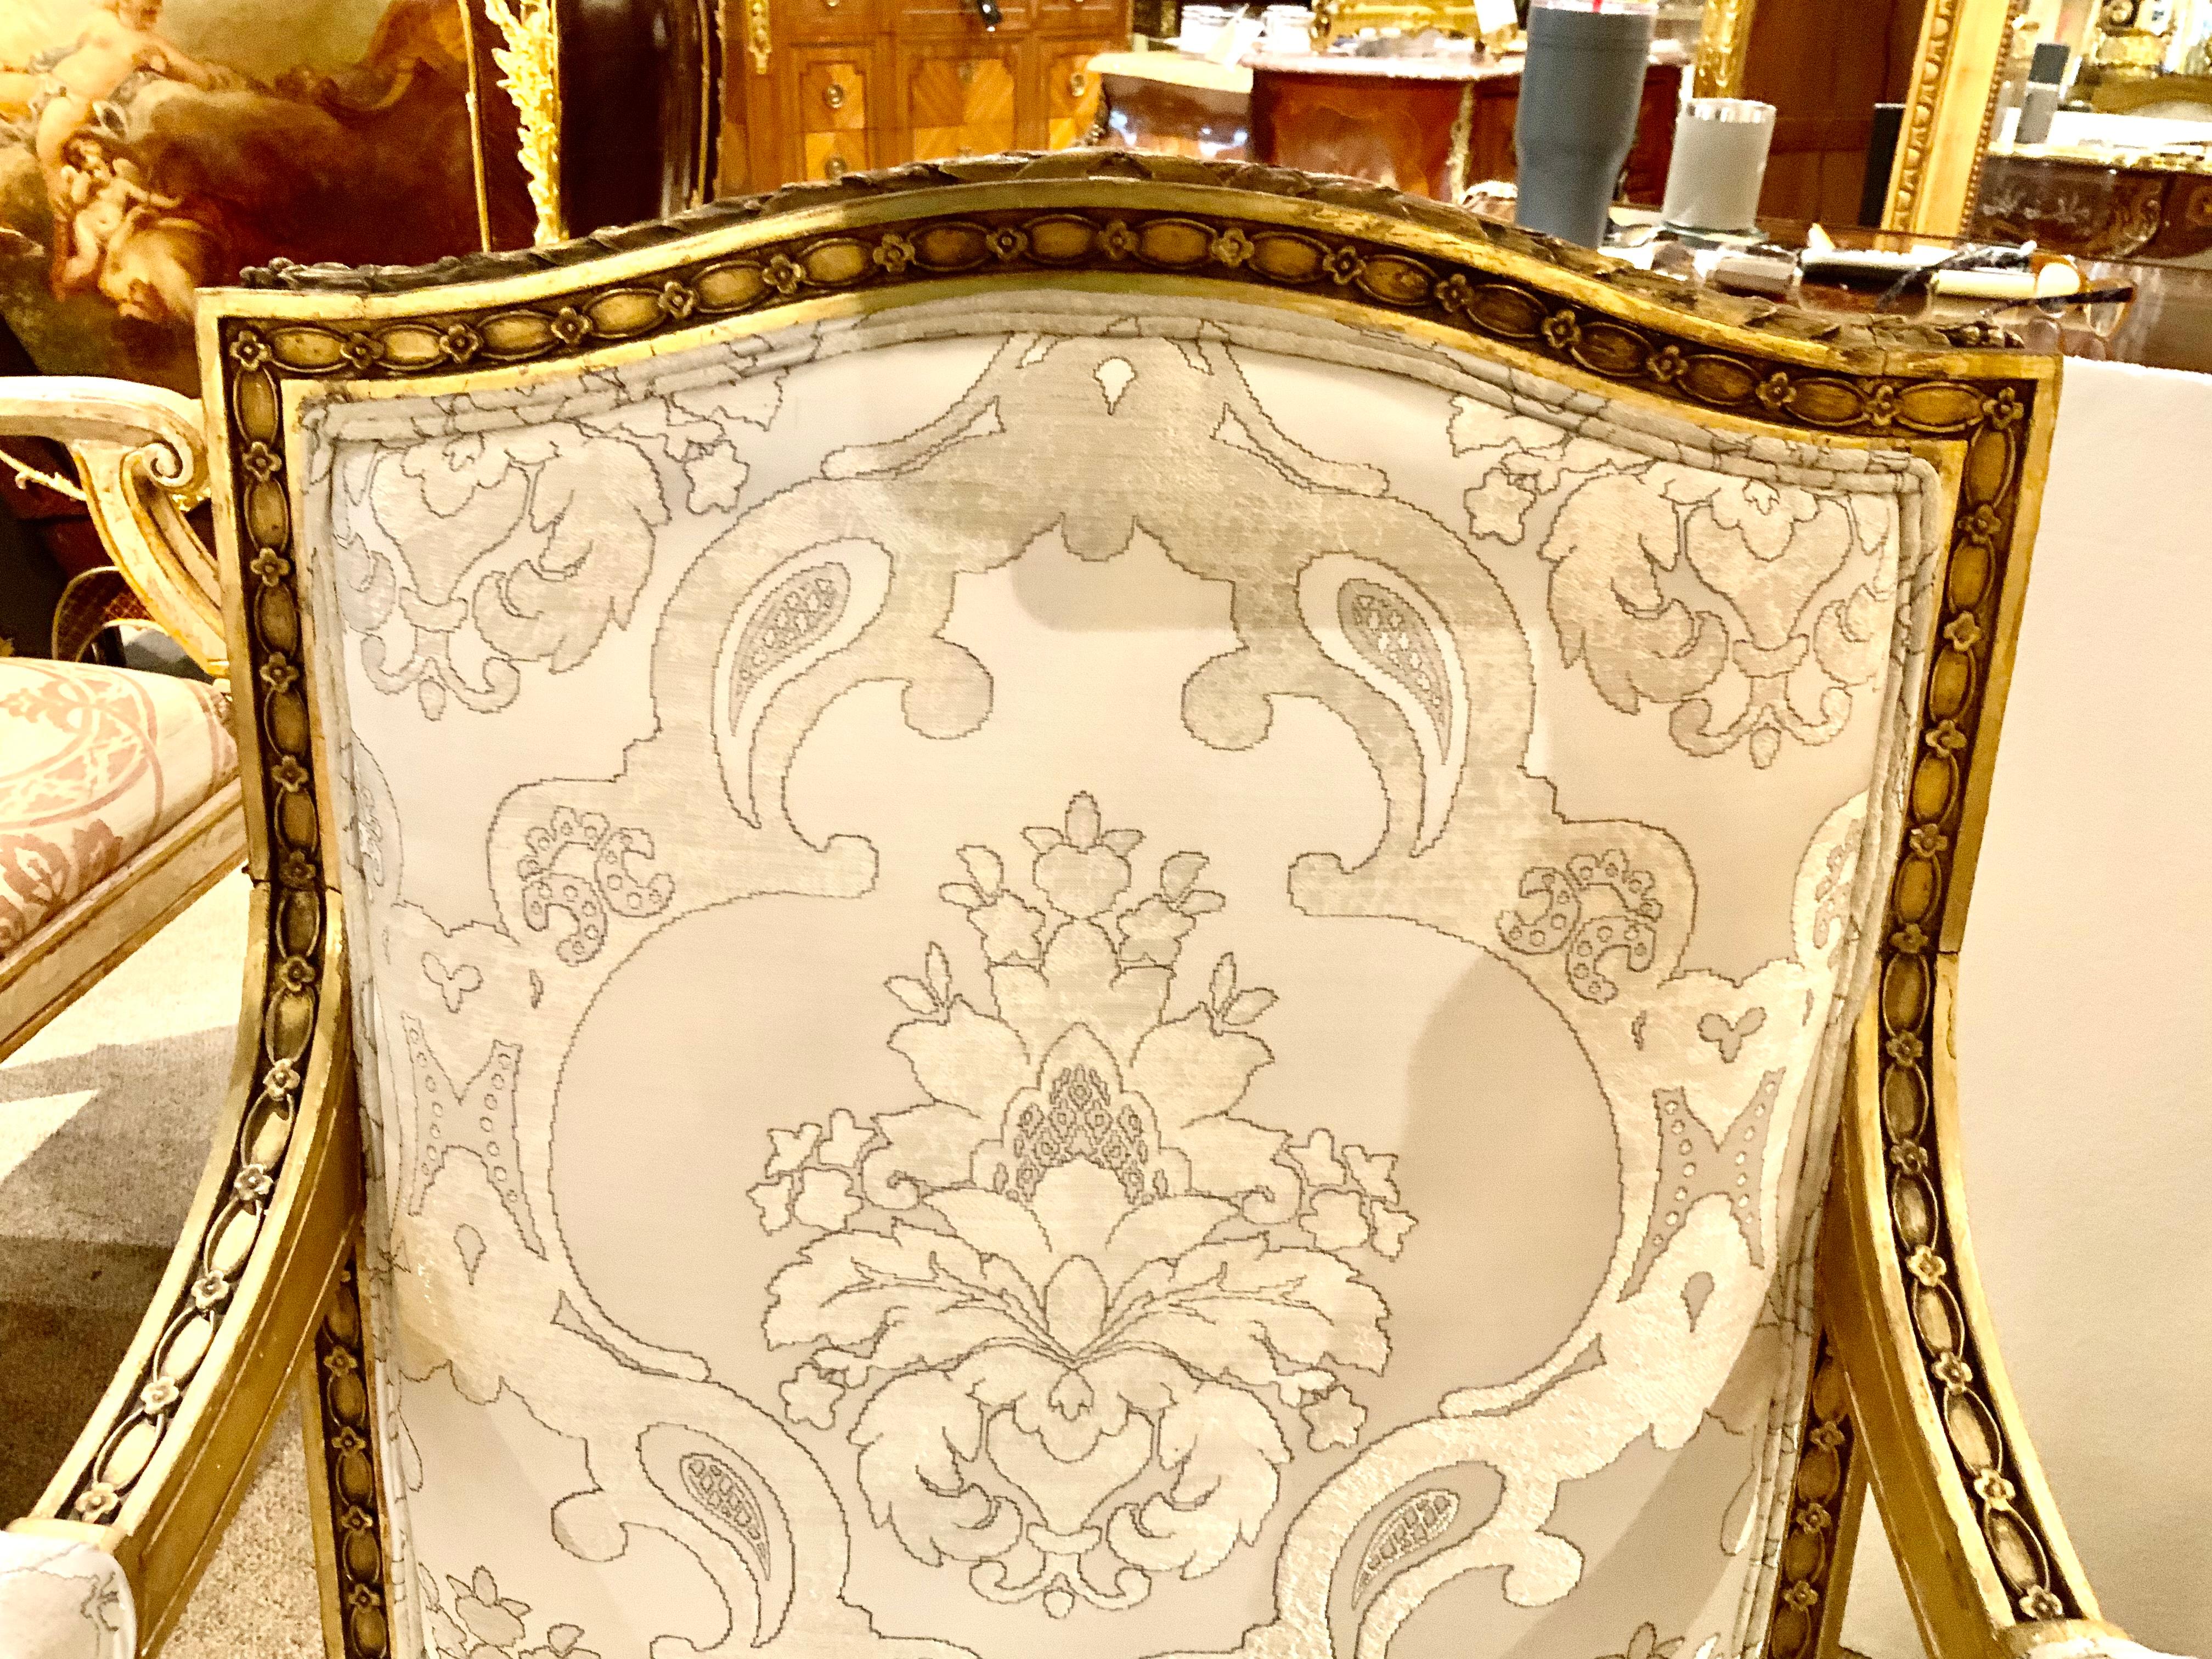 French louis XVI-styling make this pair special with a beautiful tapered
And squared leg. The chair back is gracefully shaped in a slightly
Oval raised back. The fabric is in rich hues which has shades of white,
Gray and silver. The upholstery is